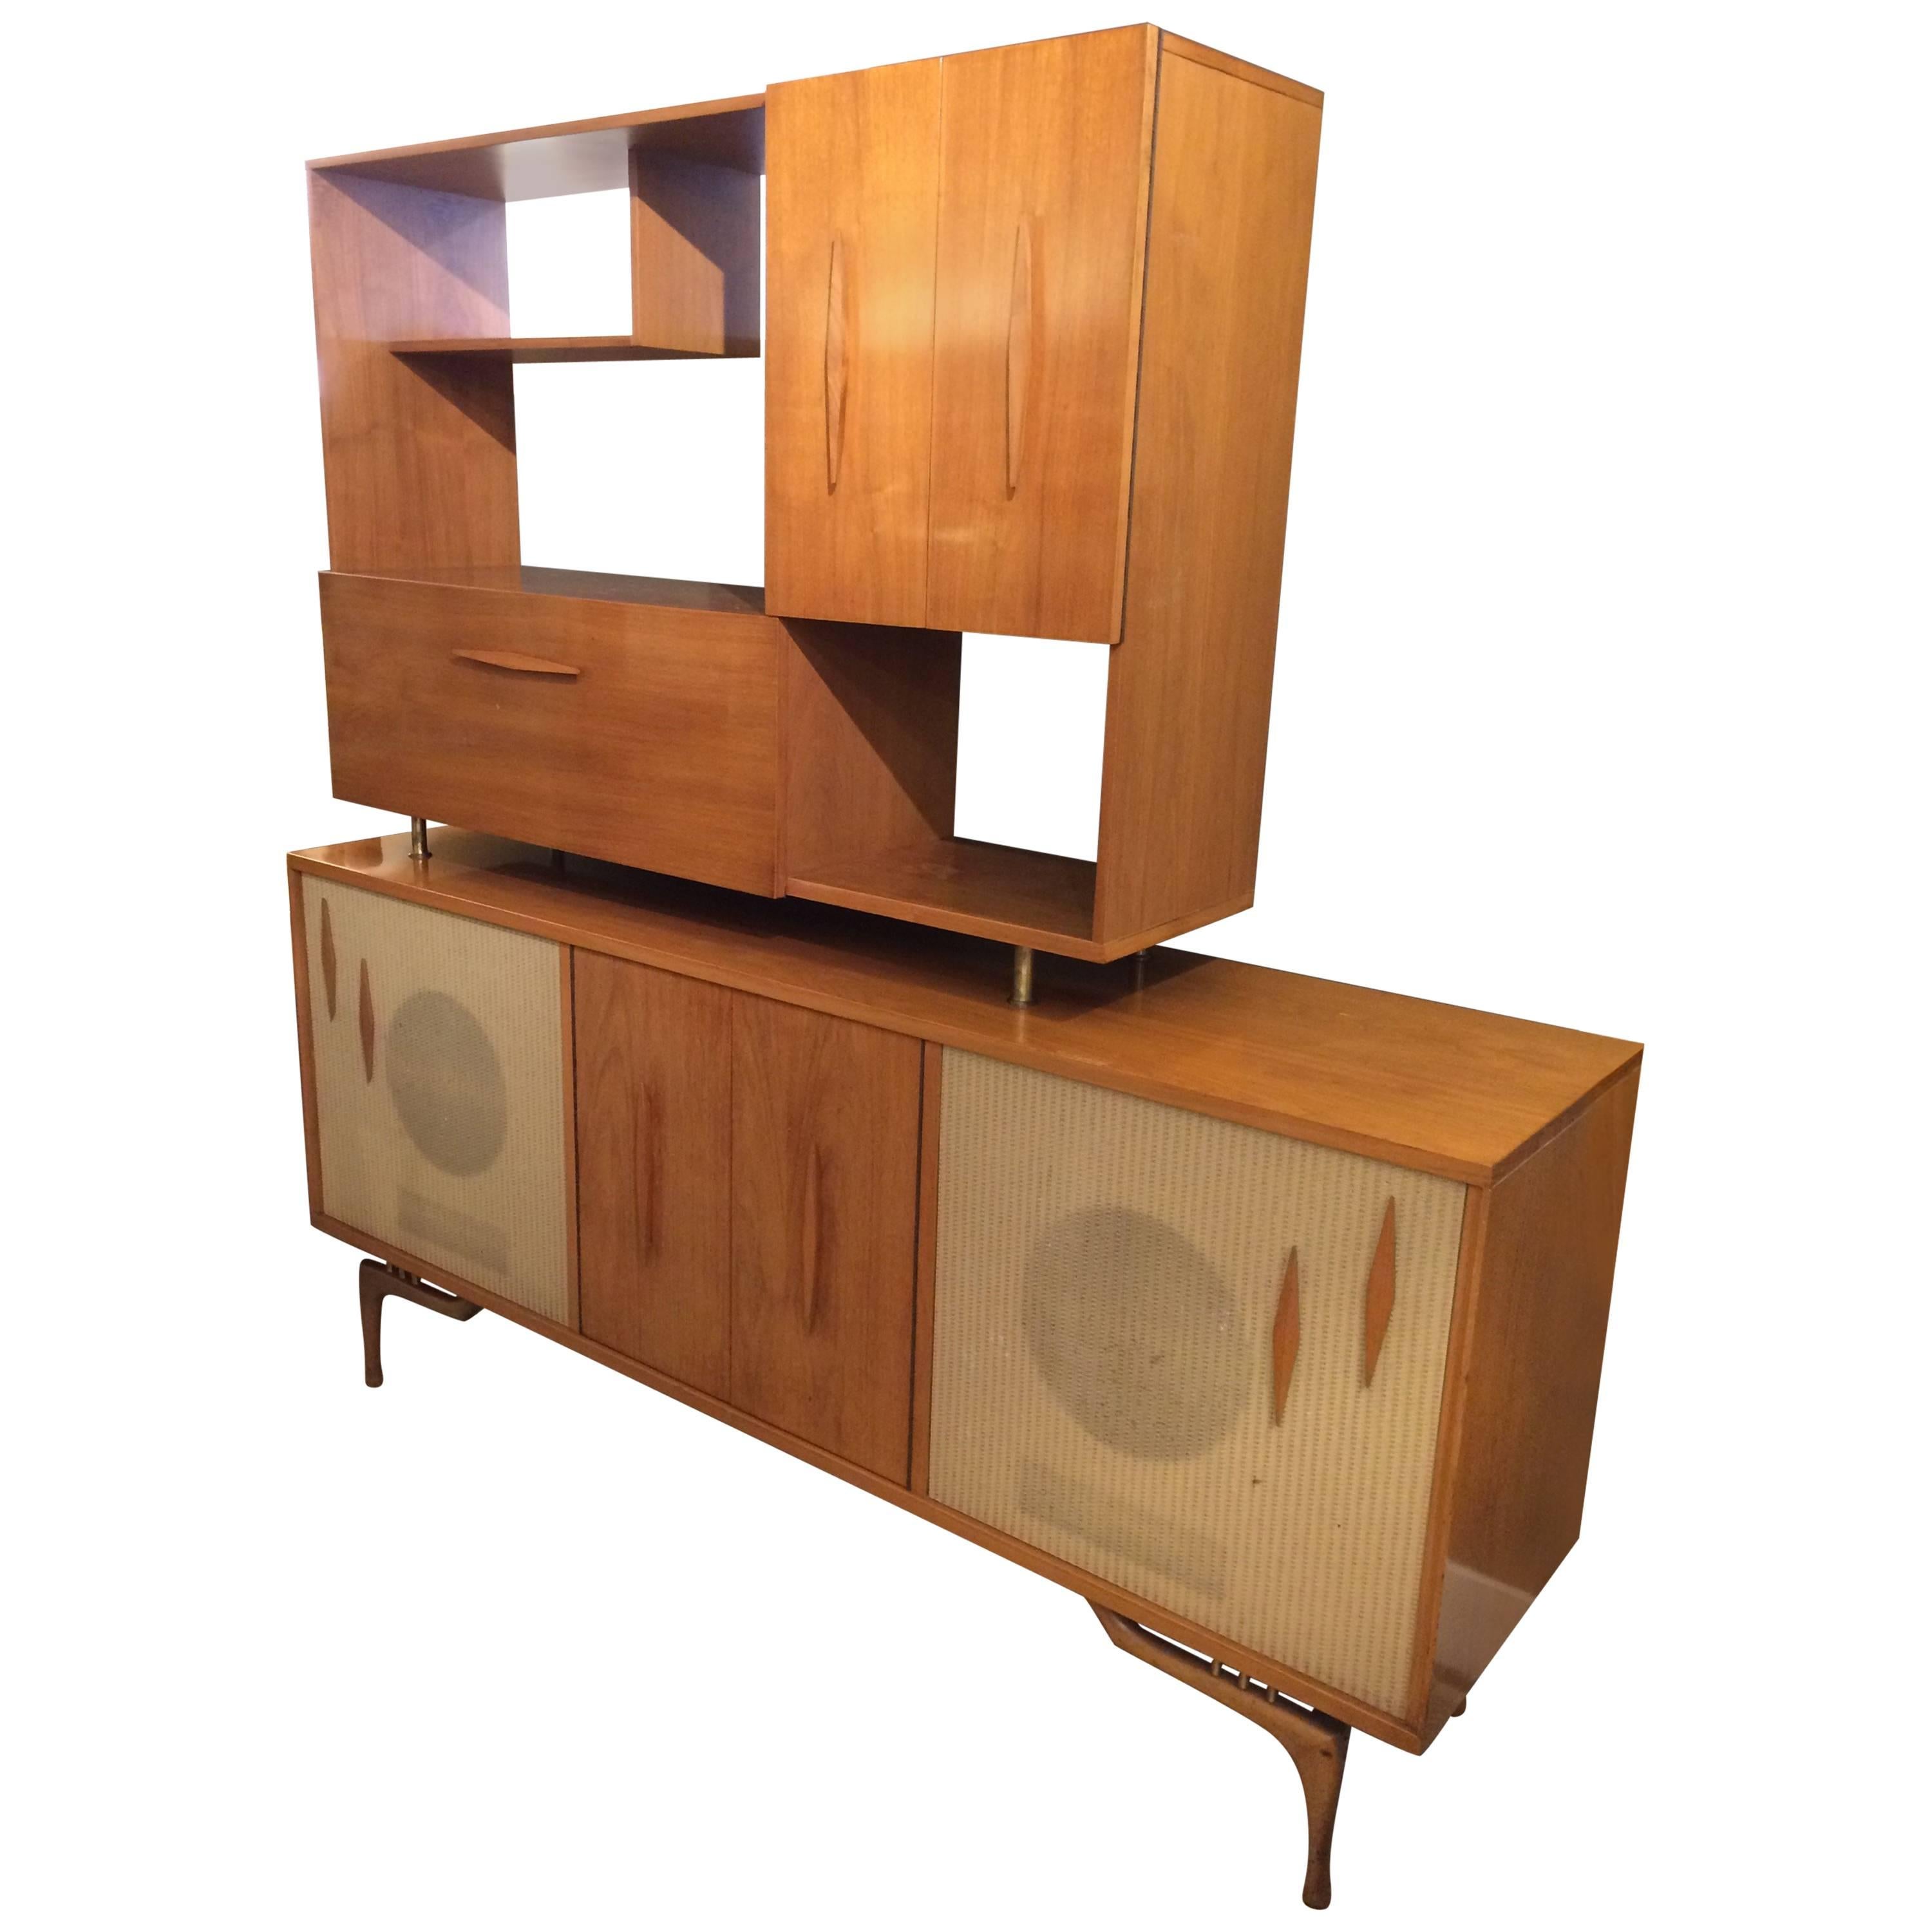 Sensational Mid-Century Modern Stereo Cabinet and Dry Bar